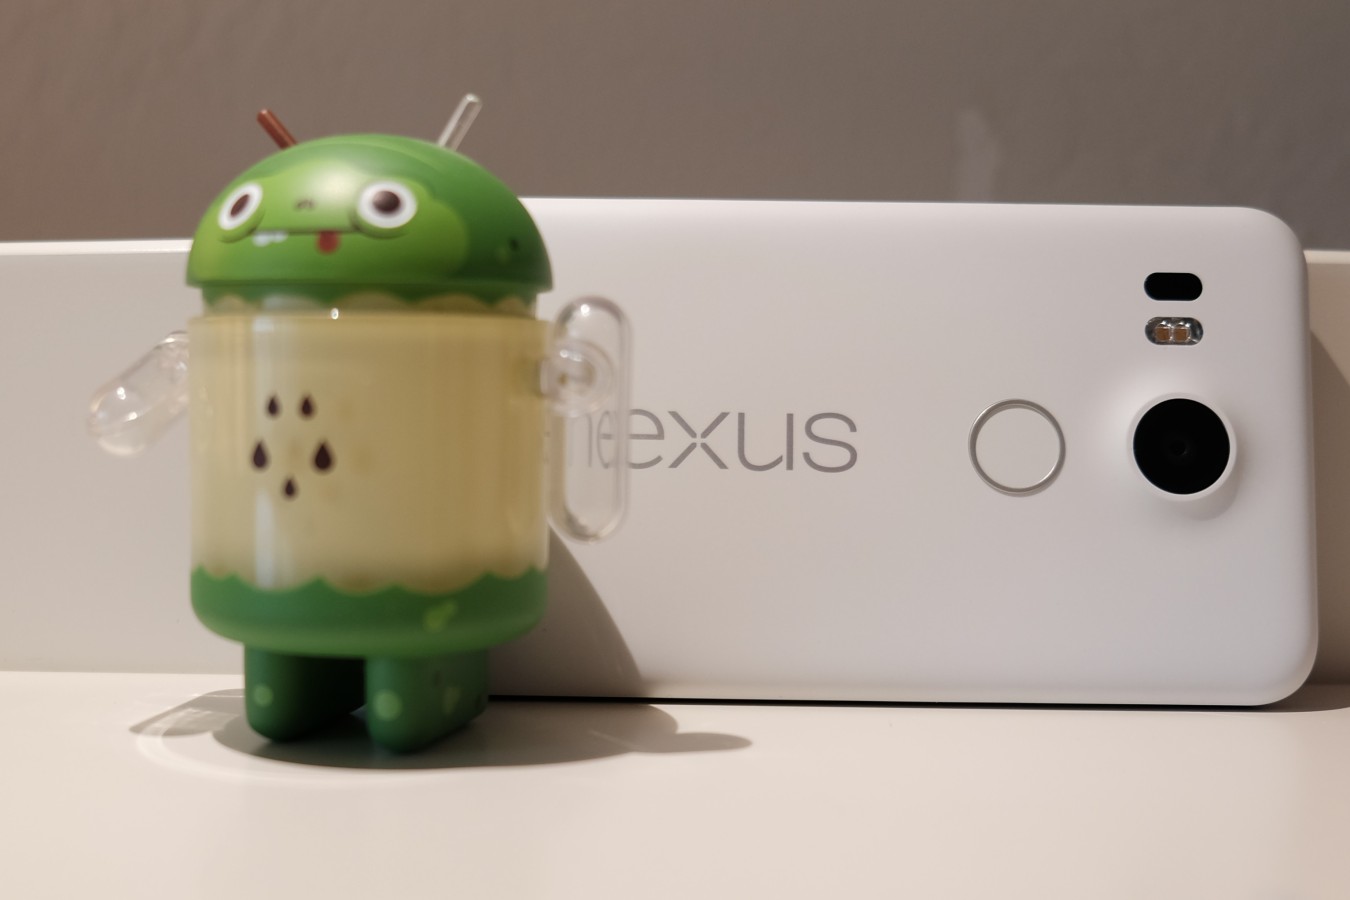 Nexus 5X and Droid Collectible